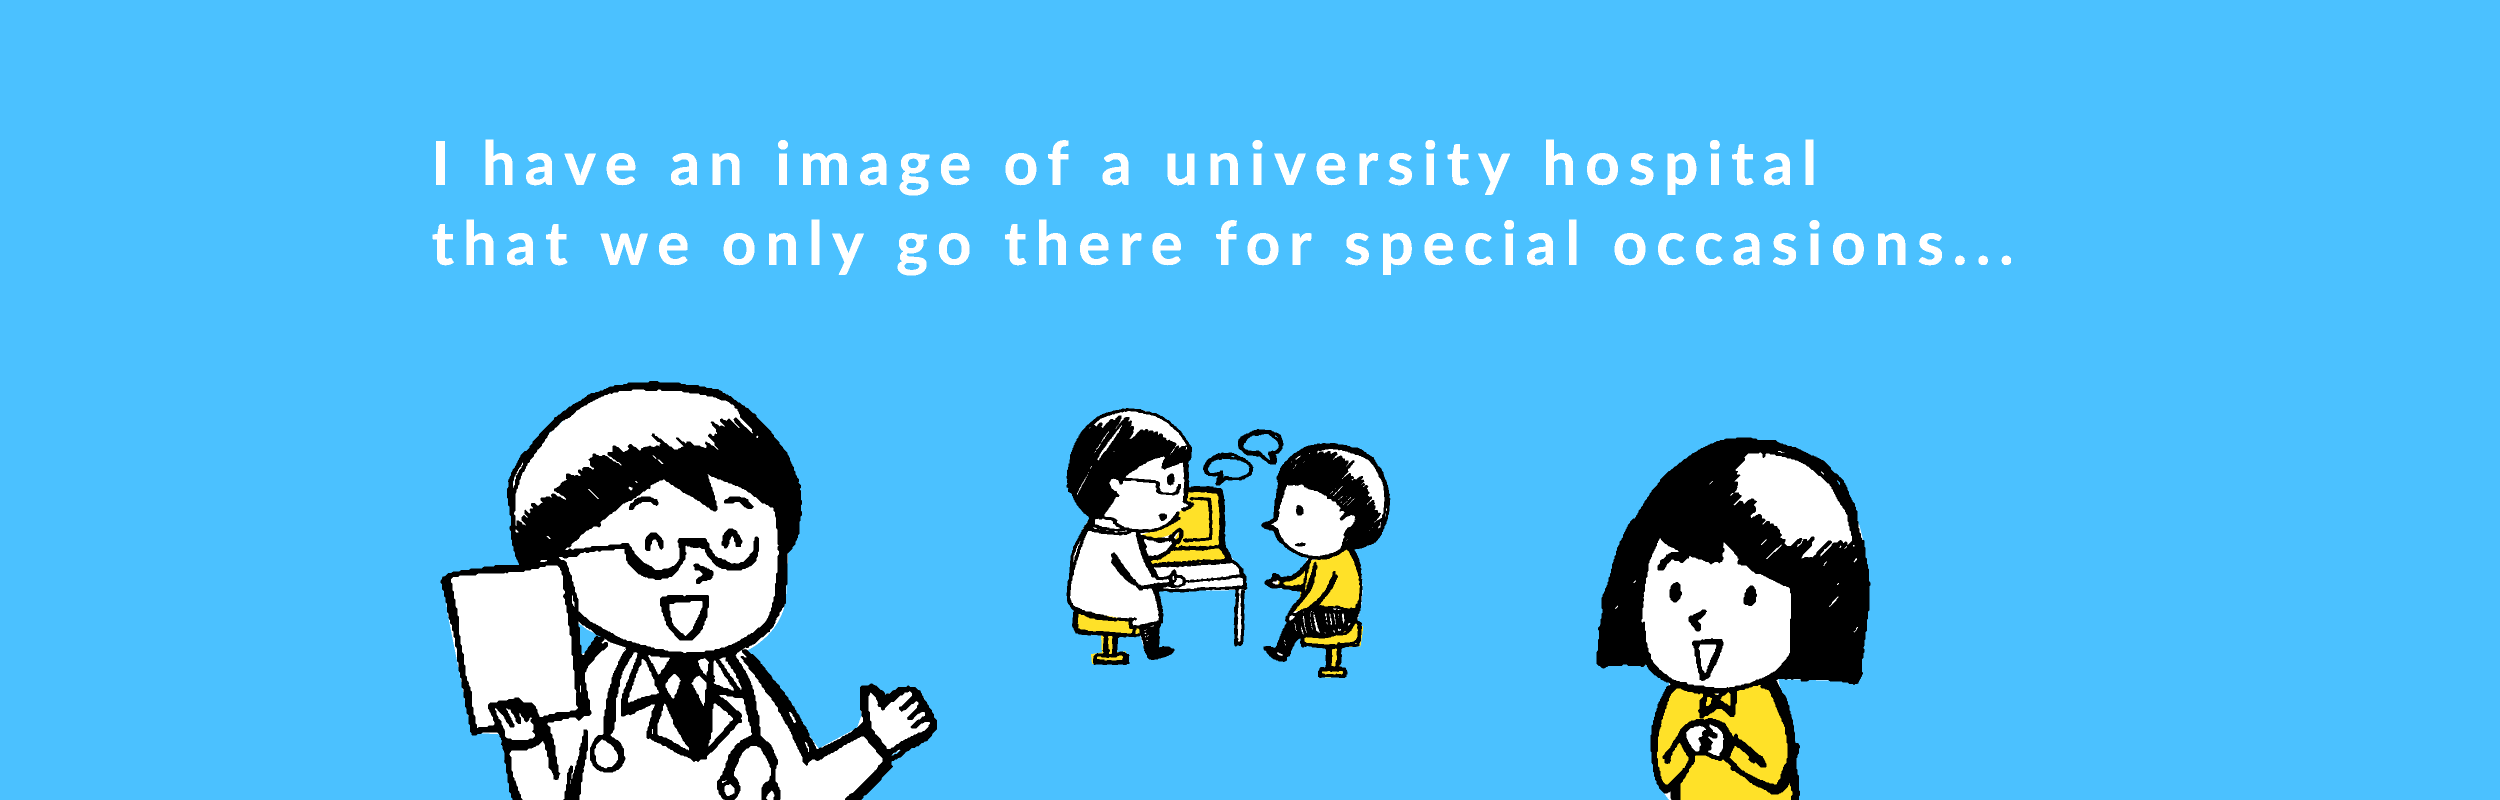 I have an image of a university hospital that we only go there for special occasions...